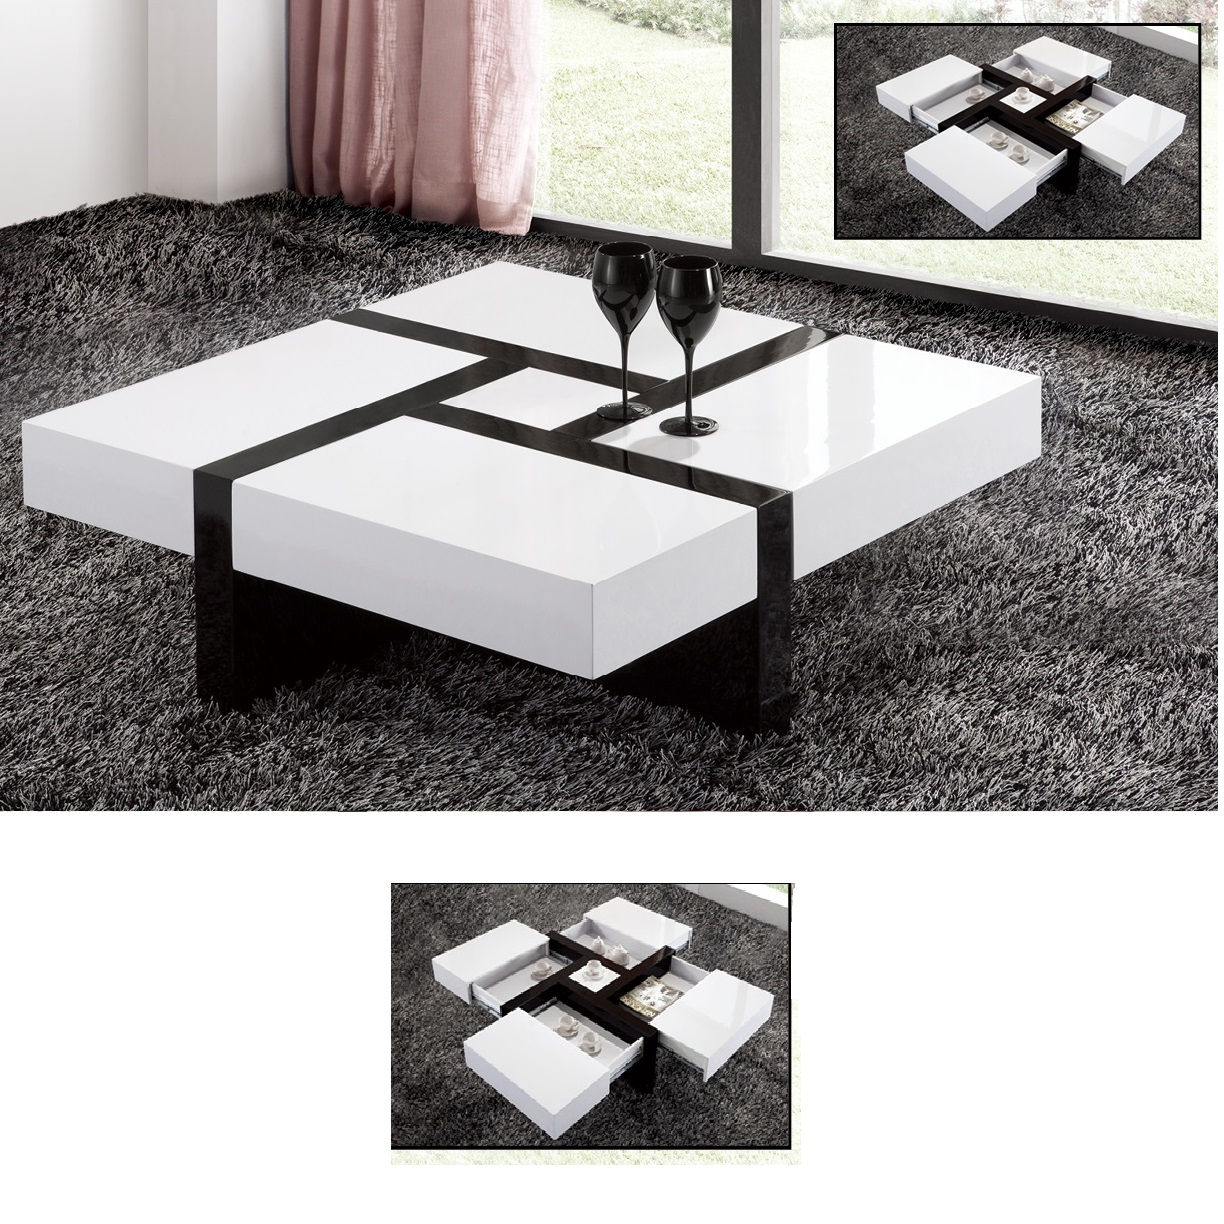 ST C18 sqaure coffee table roomset - Extendable High Gloss Coffee Table